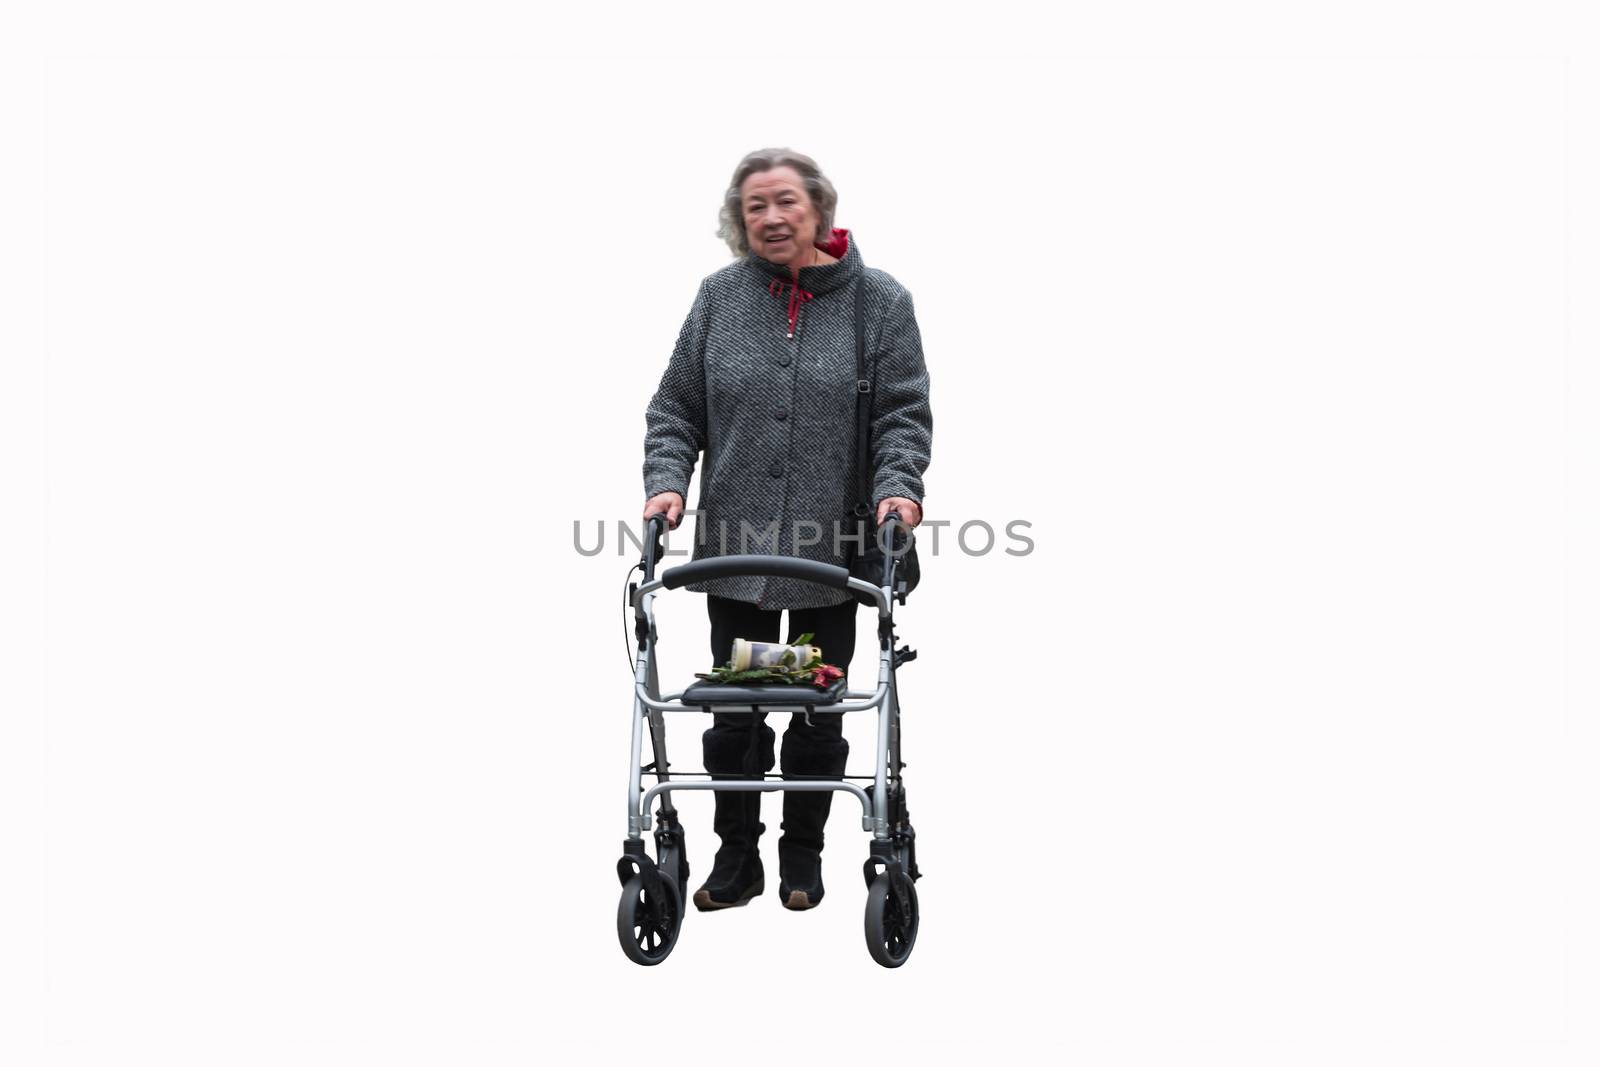 Elderly lady with a walker against white background.